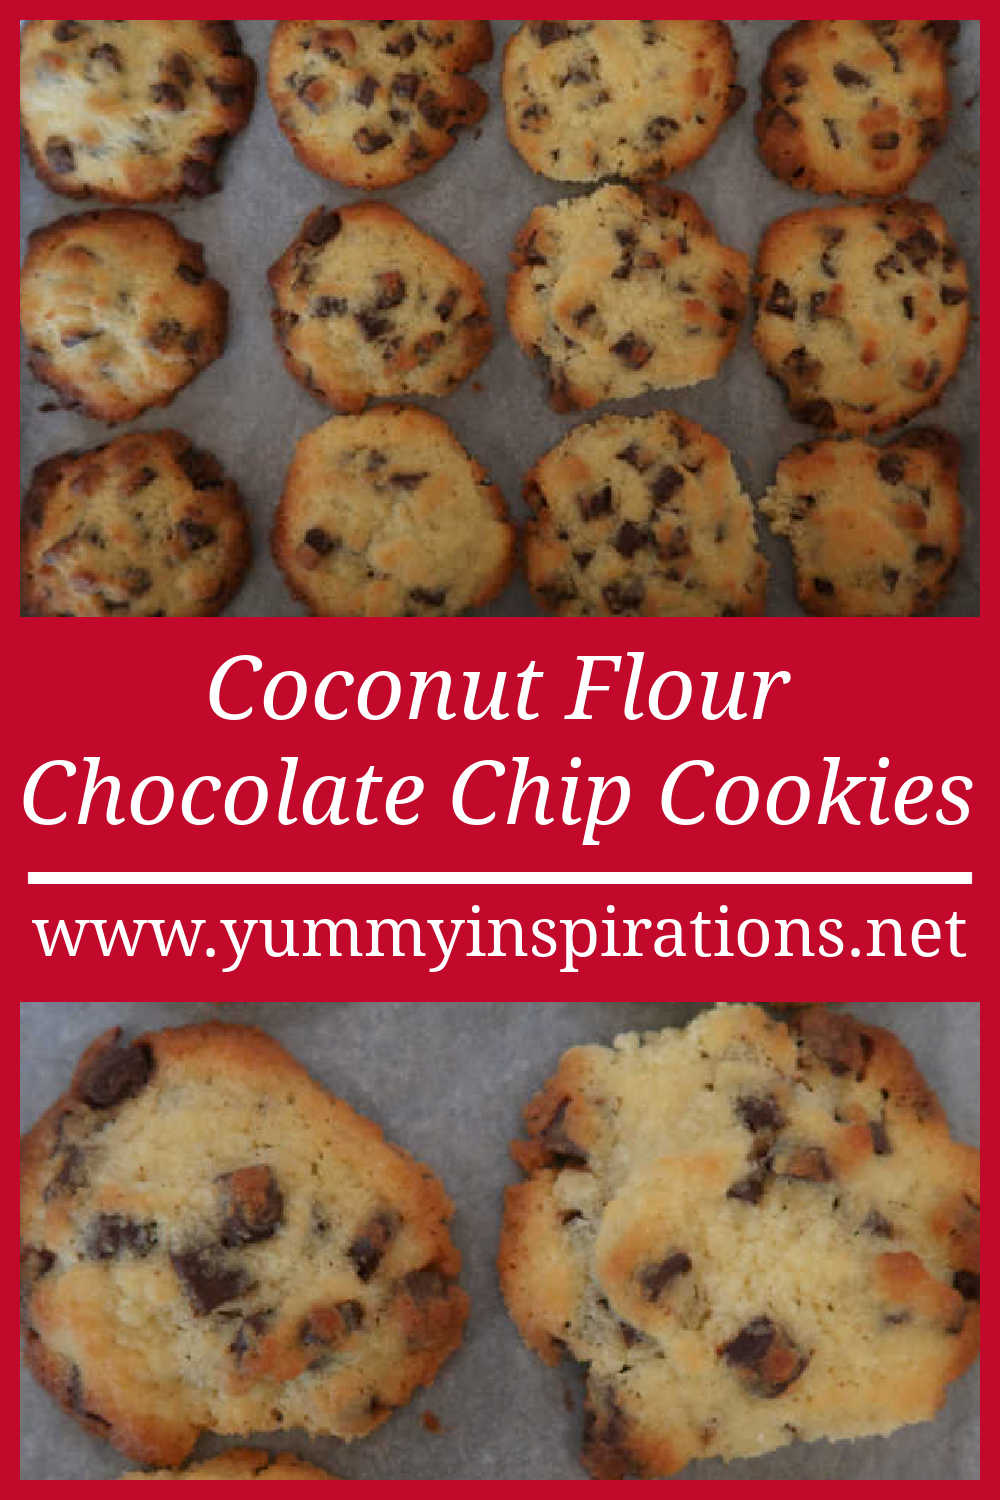 Coconut Flour Chocolate Chip Cookies - Perfect Easy Low Carb, Keto, Gluten Free and Paleo Friendly Recipe - with the video tutorial.